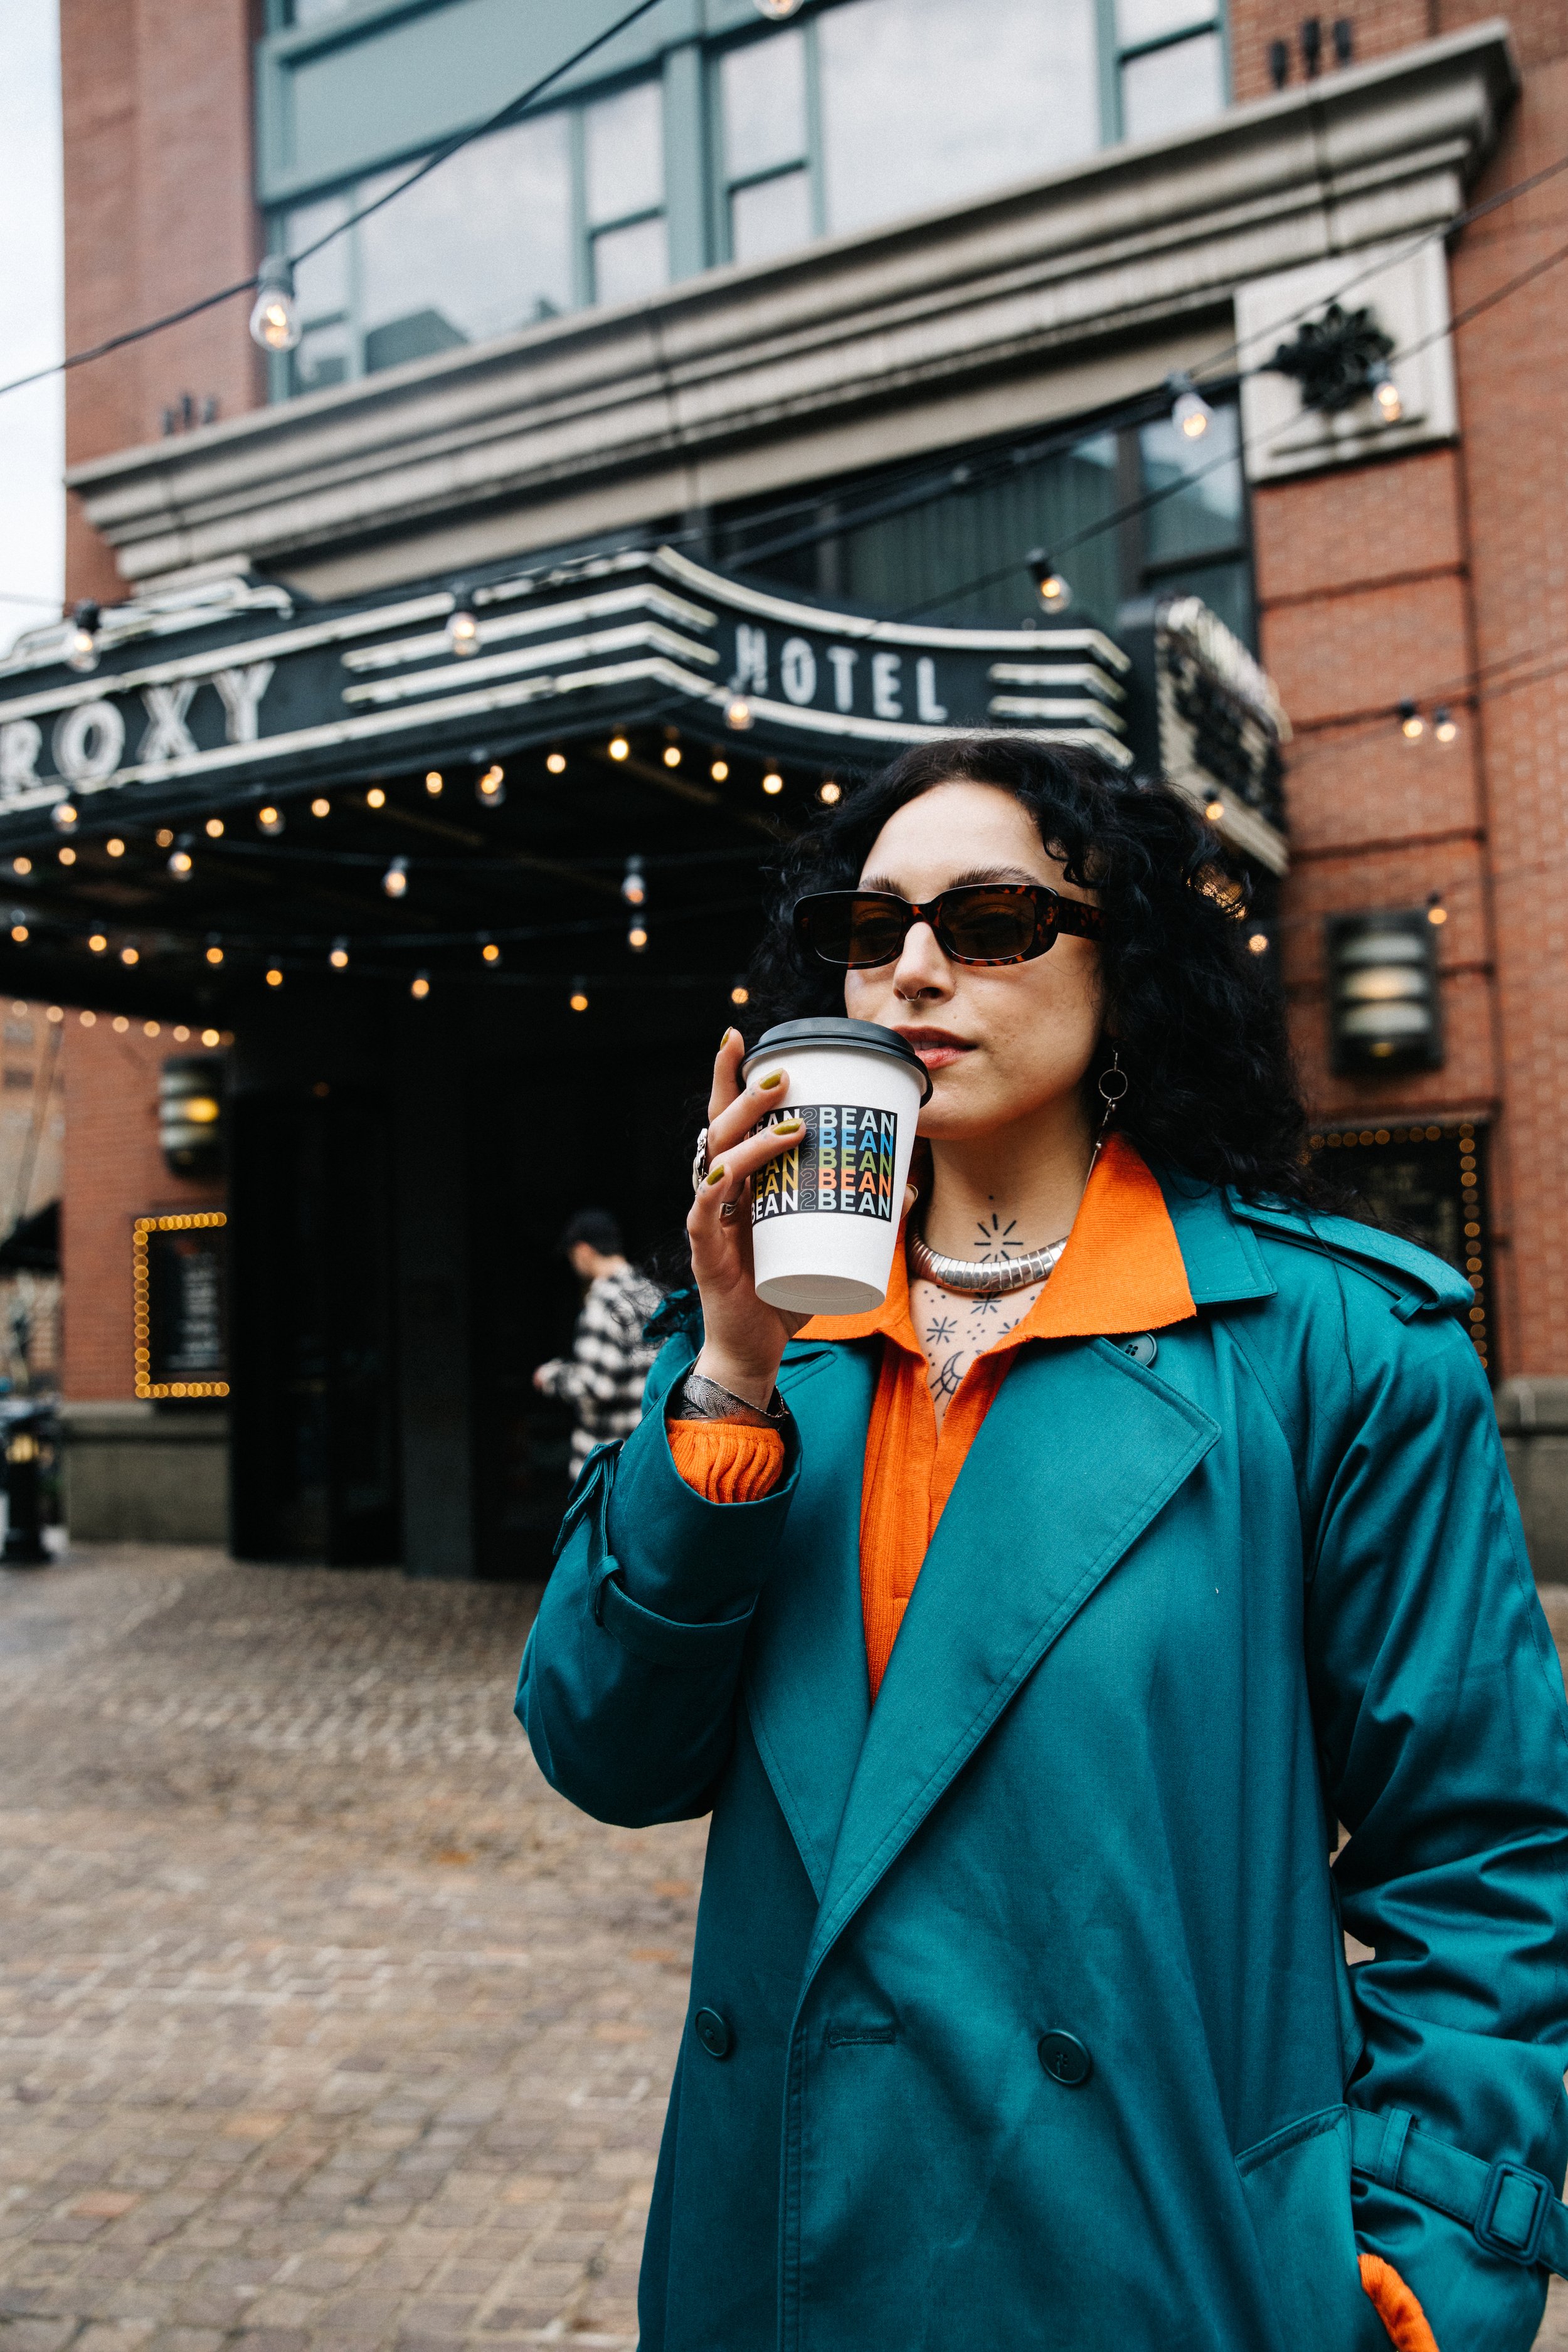 Drinking Bean2Bean Coffee Outside the Roxy Hotel in NYC, Photo by Corey Jermaine